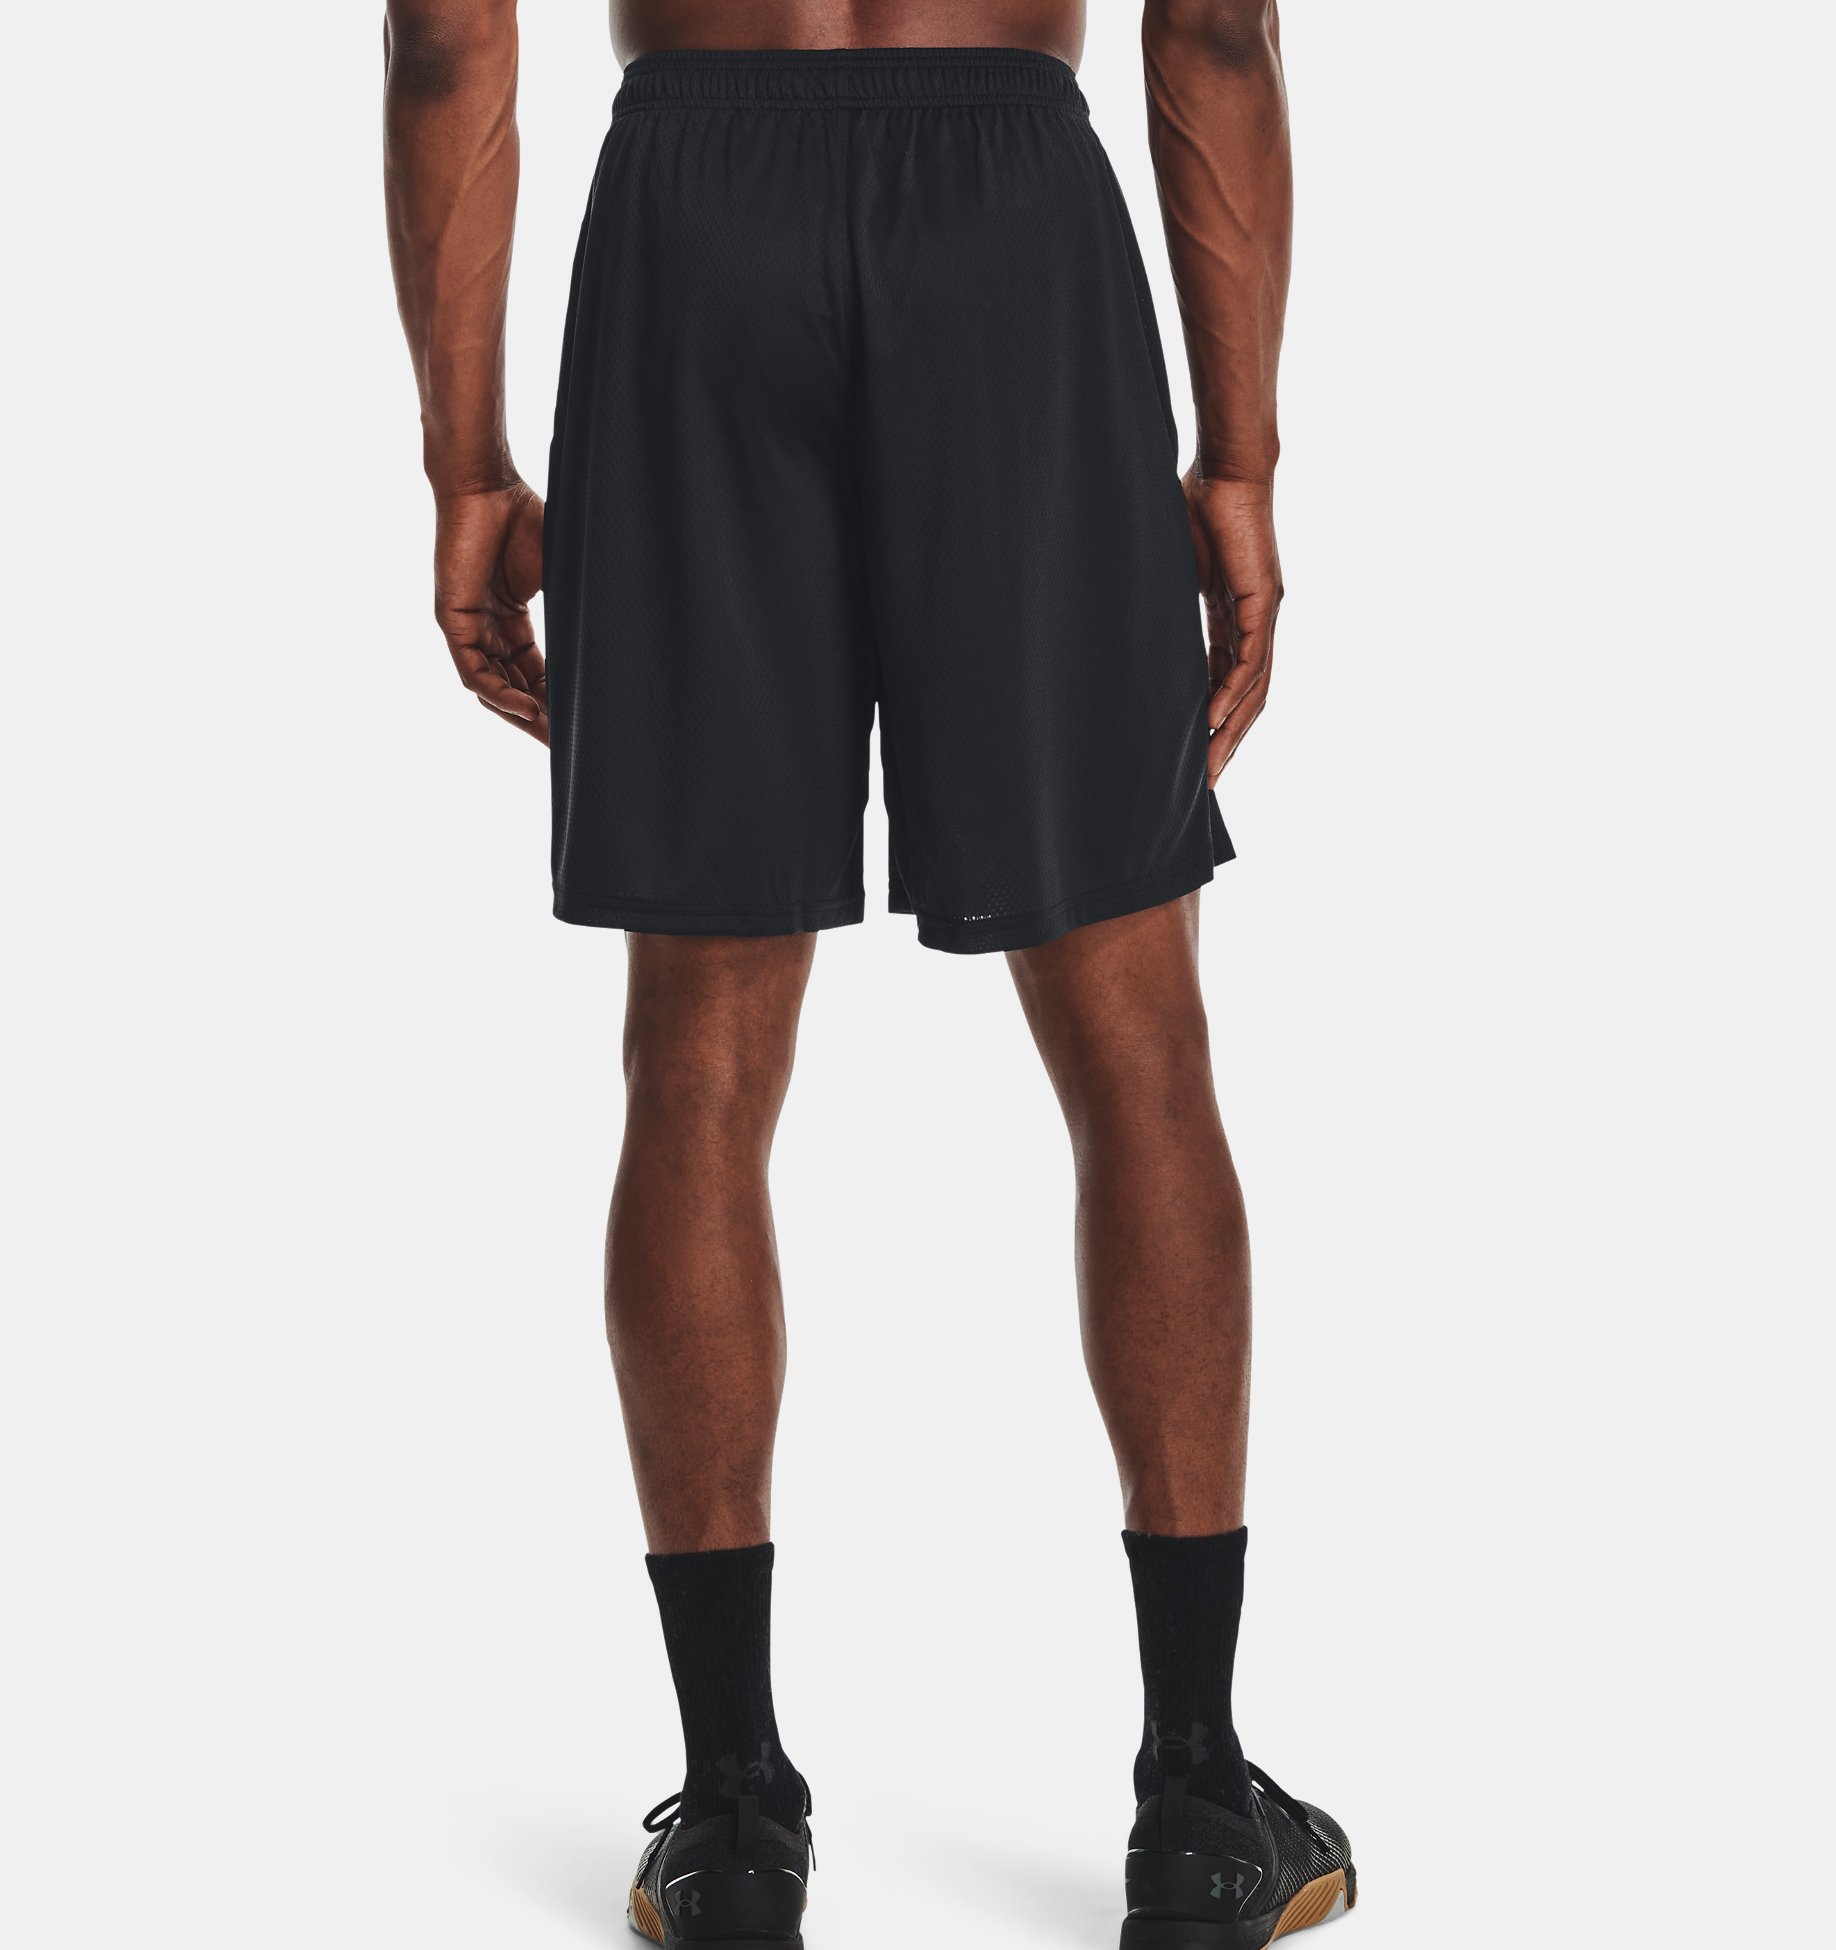 Versatile Sports Shorts for Training Running and Working Out Under Armour Mens Ua Tech Mesh Short Mens Gym Shorts with Complete Ventilation 